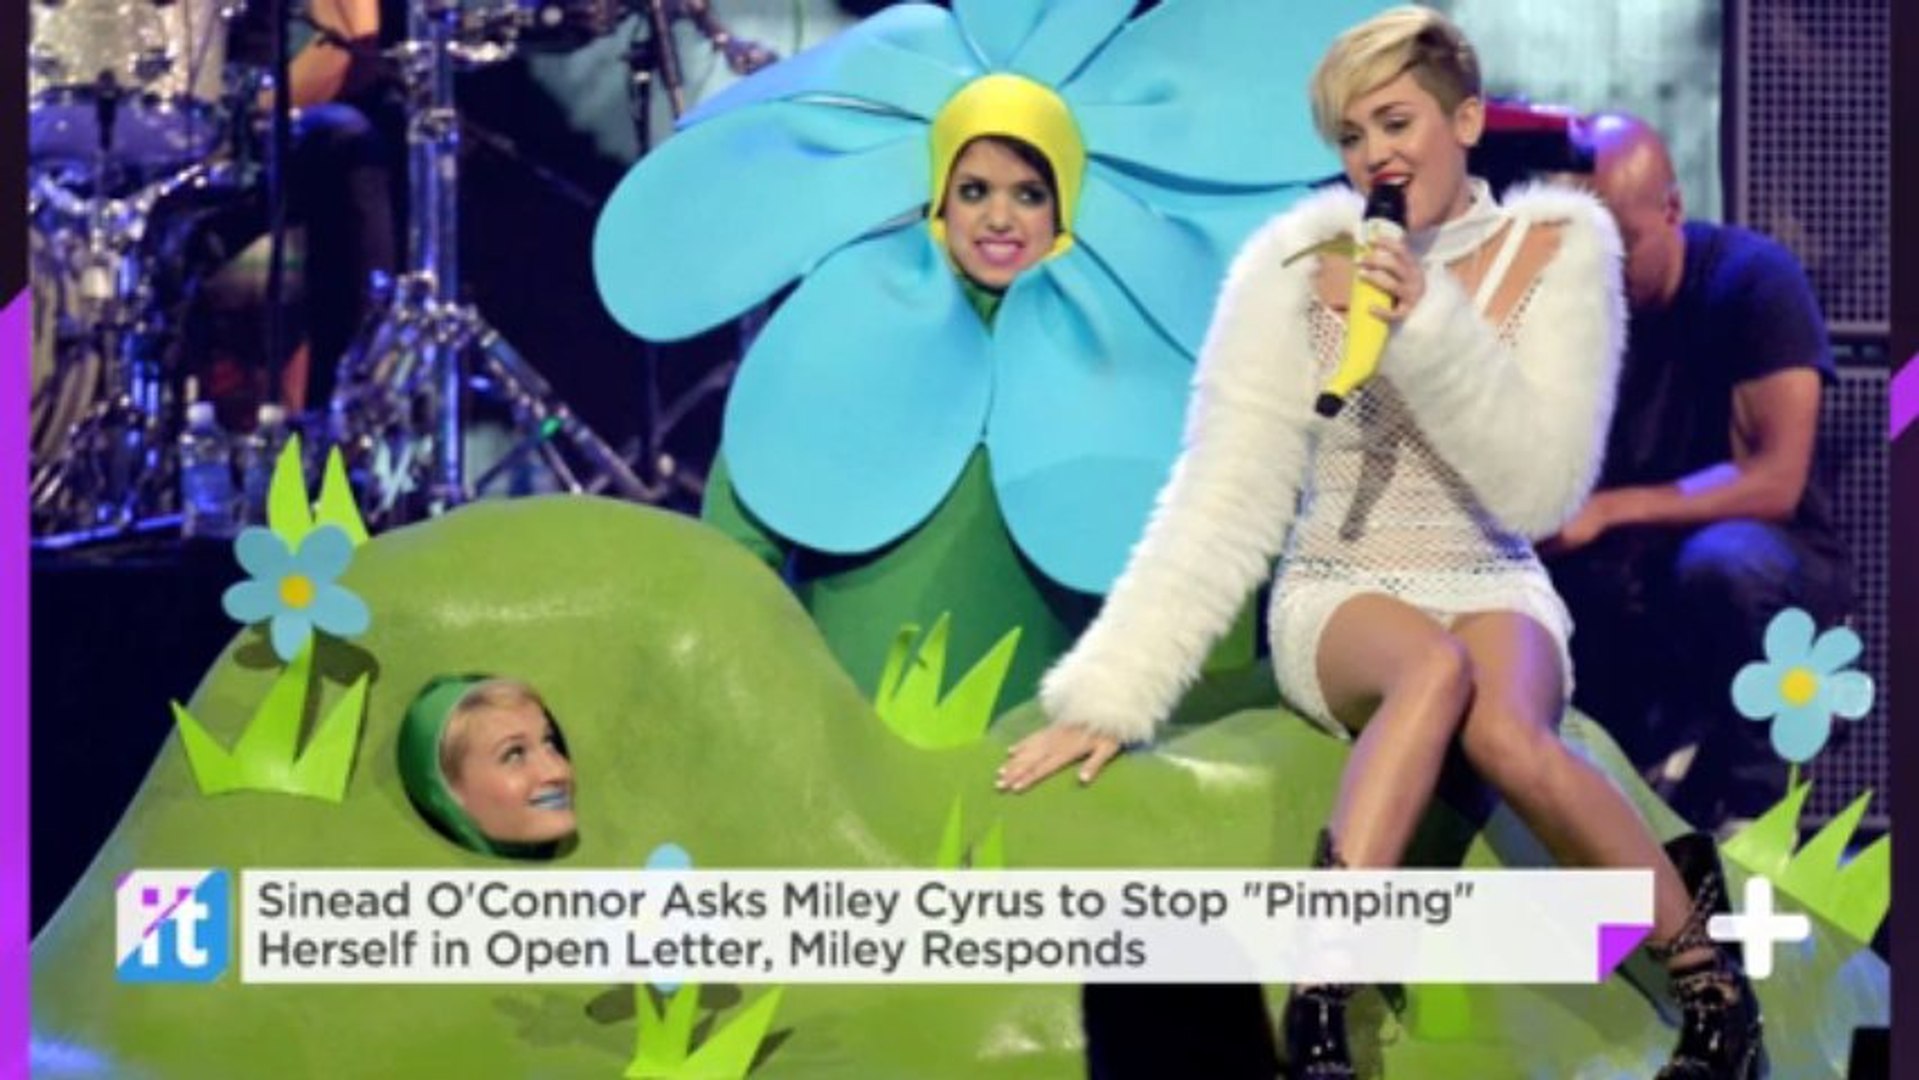 Sinead O'Connor Asks Miley Cyrus To Stop